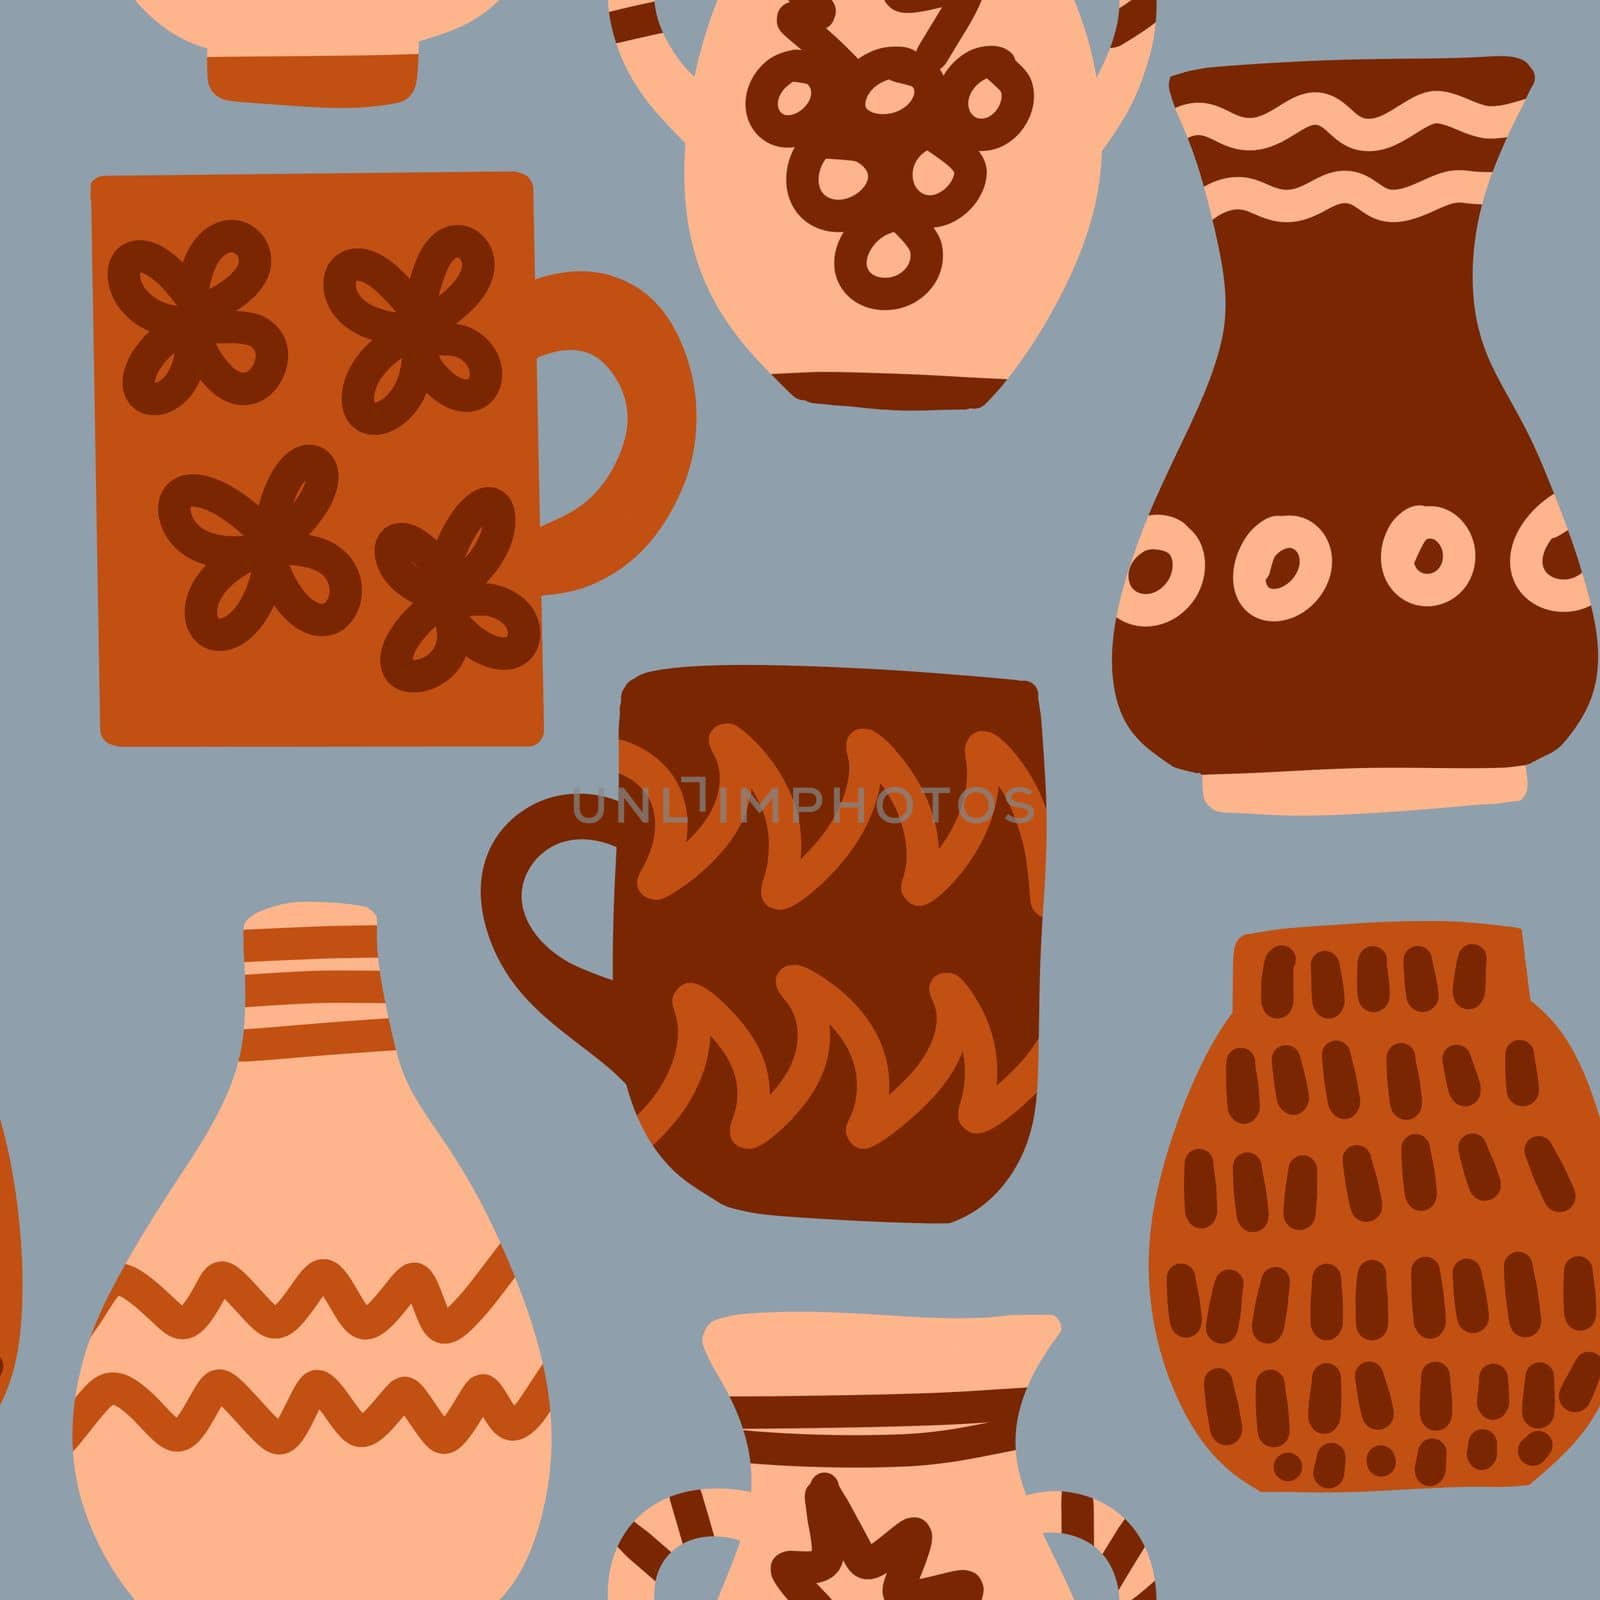 Hand drawn seamless pattern of pottery mugs vases in beige brown on grey background. Ceramic bowl tableware kitchenware kitchen design, cooking dishware in anicent greek style, ceramics utensils design